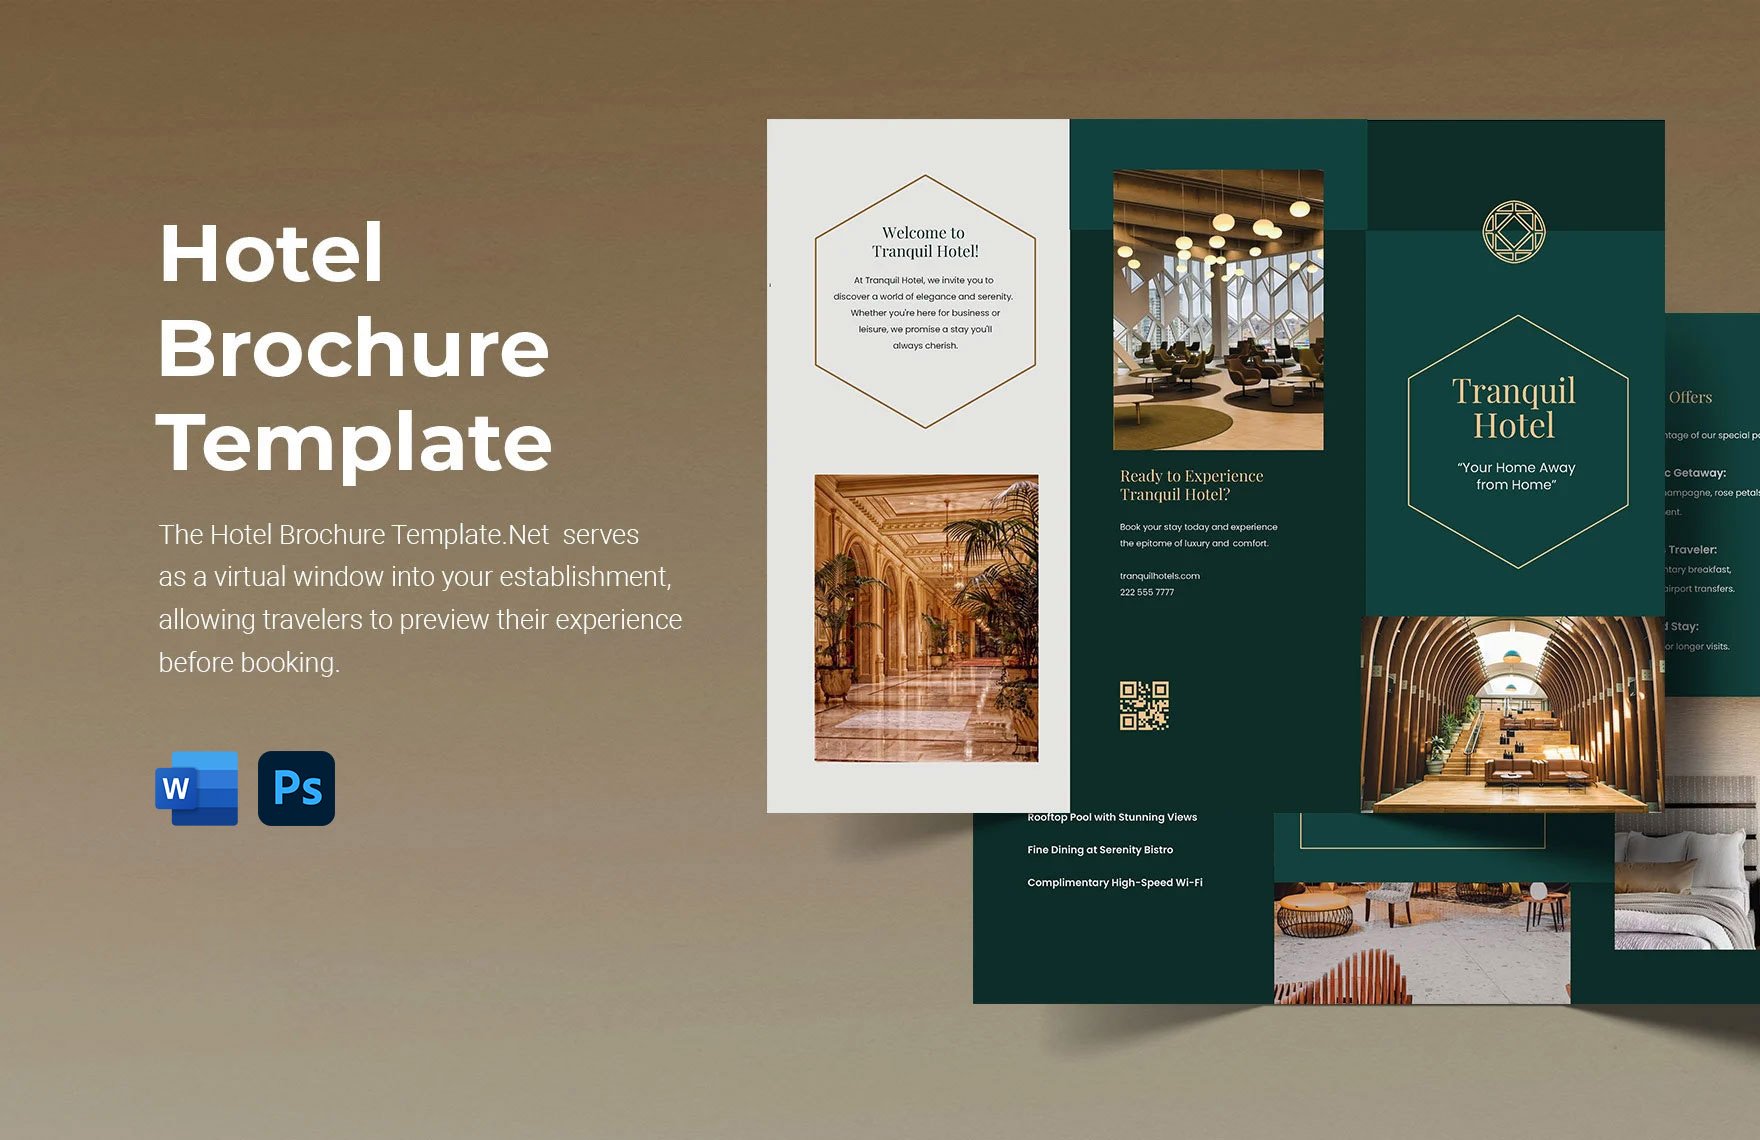 Free Hotel Brochure Template in Word, PSD